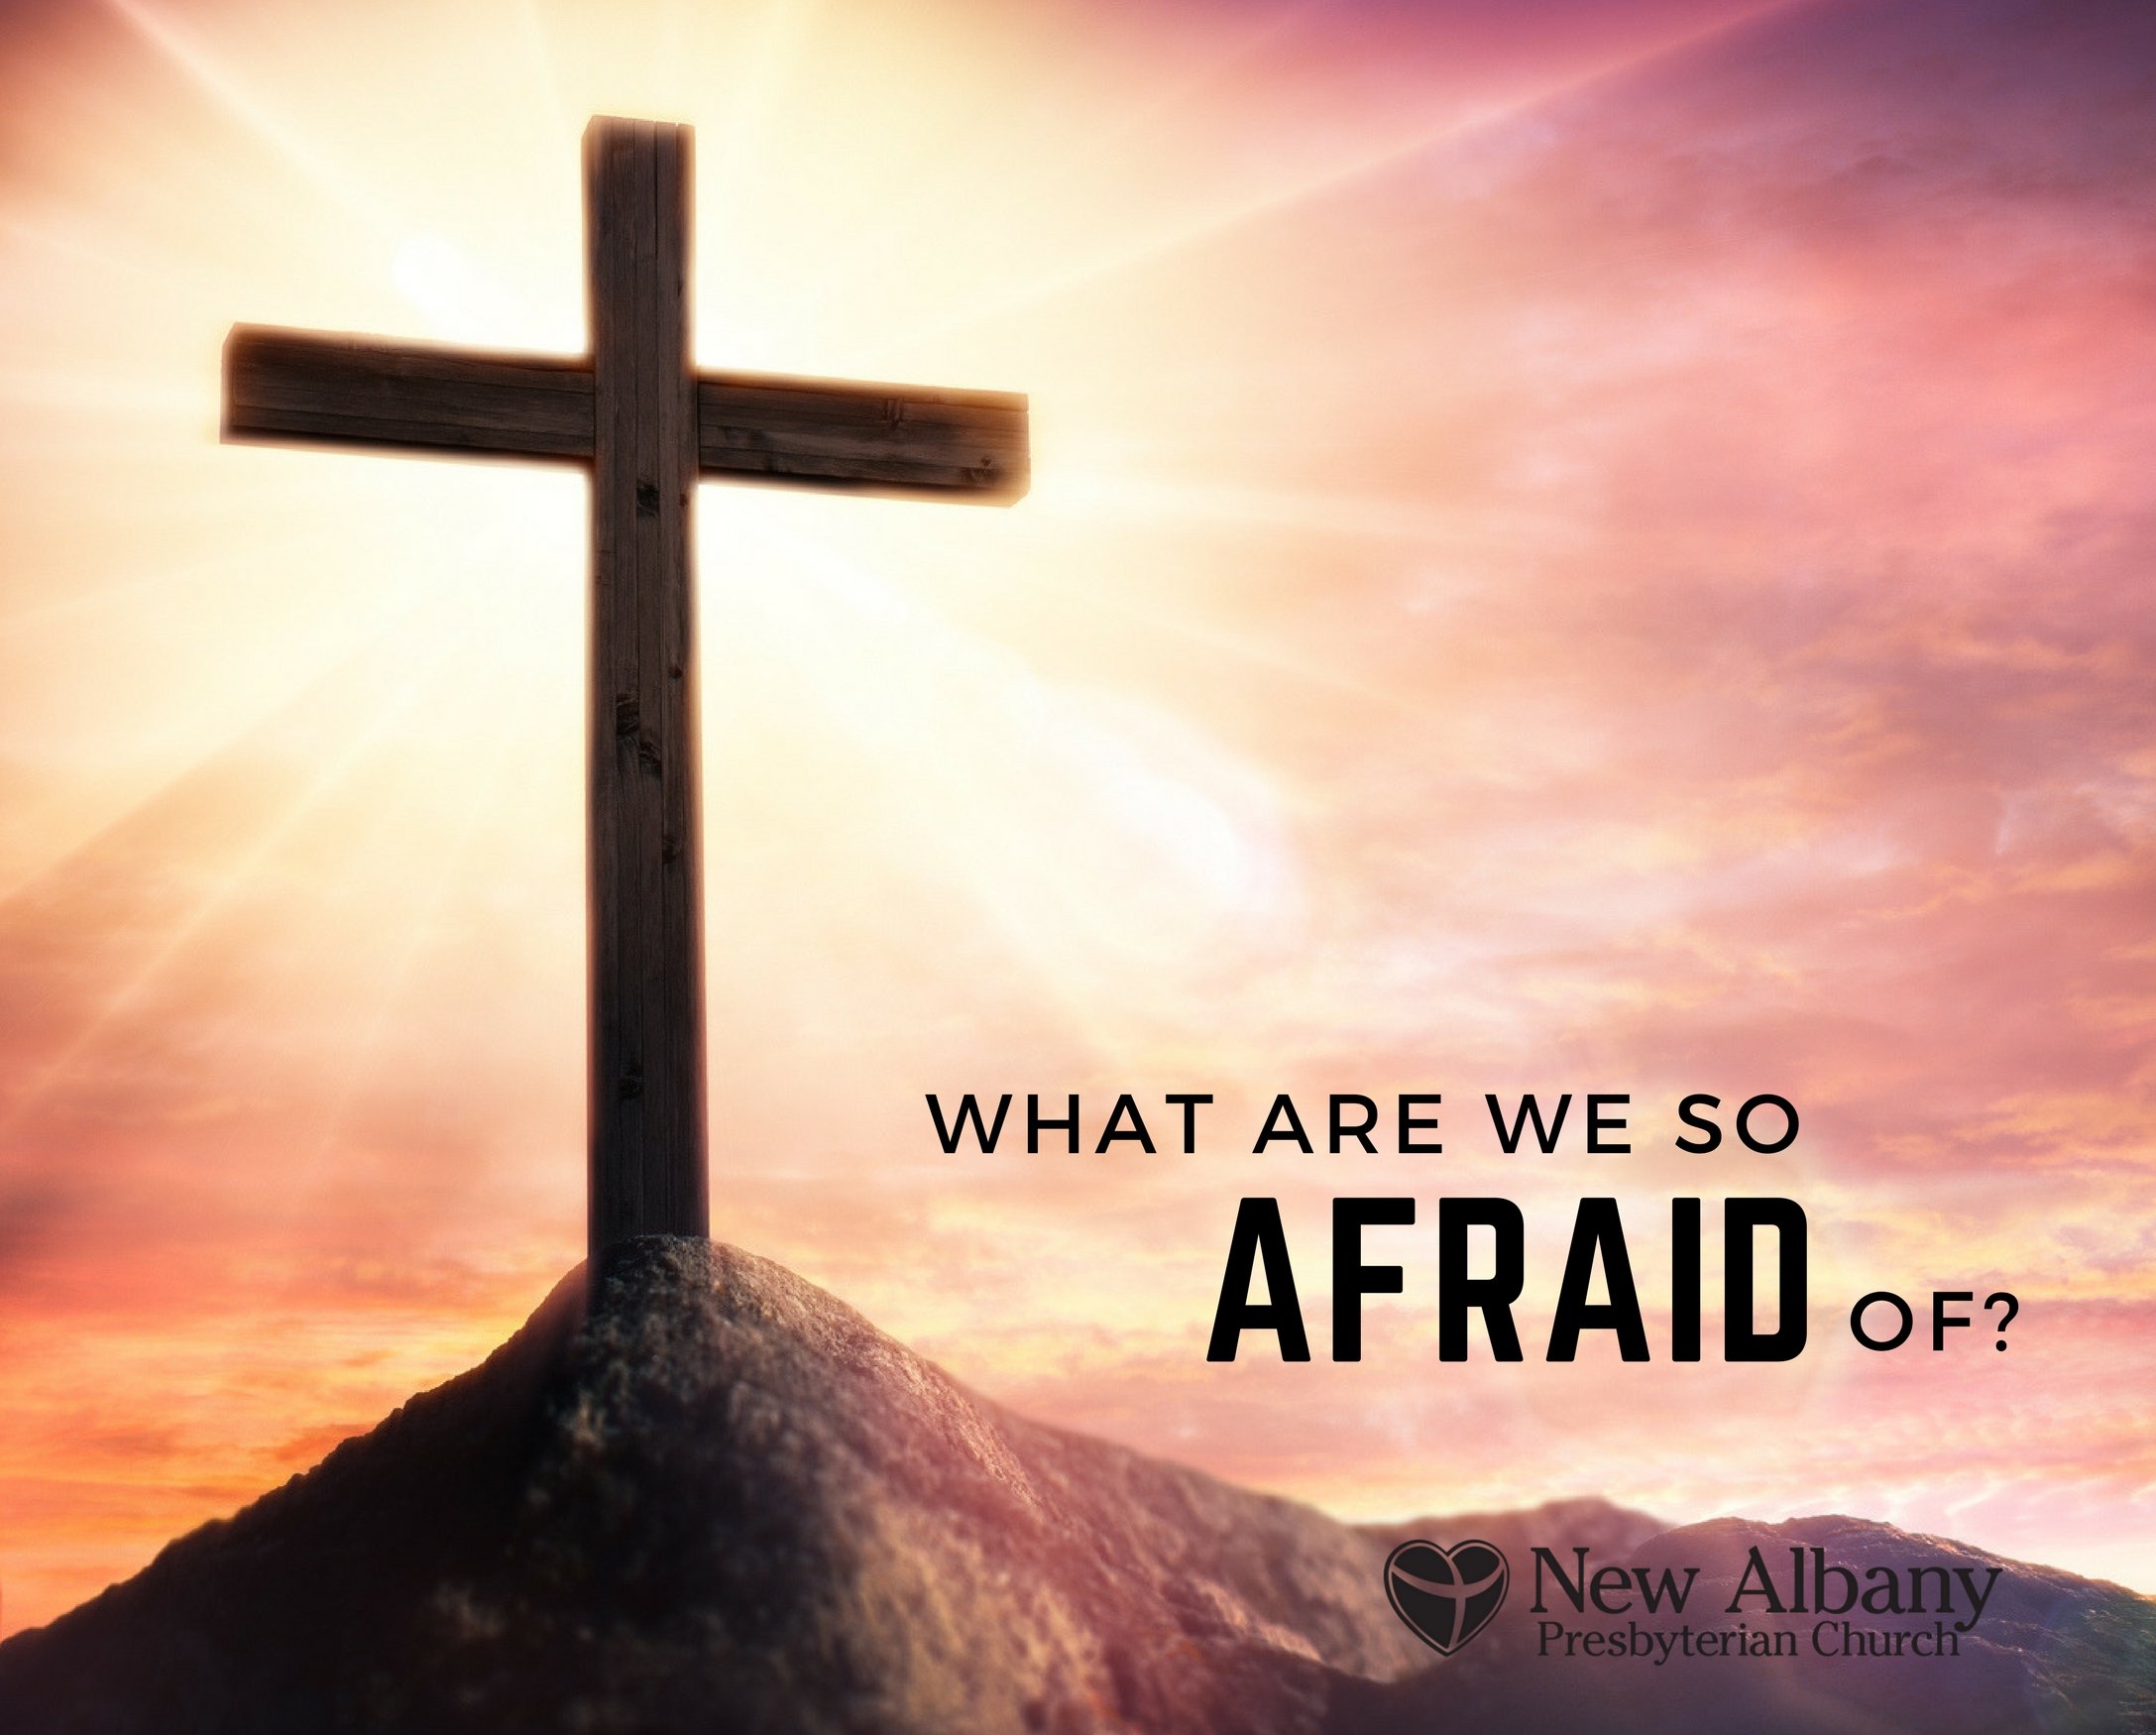 What are we so afraid of? Fear of God